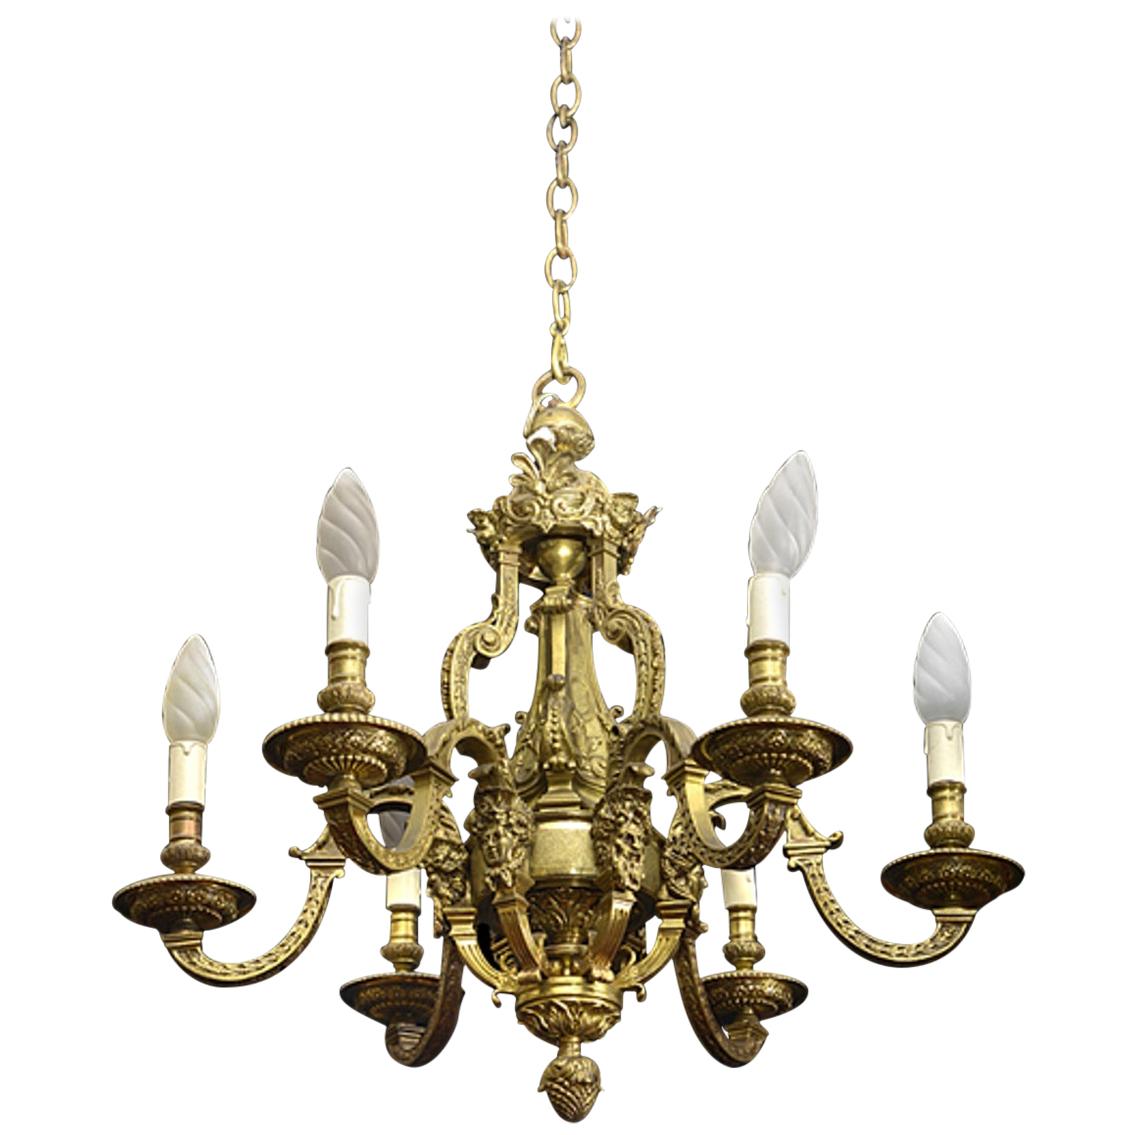  Late 19th Century French Six Arm Brass Chandelier in the Louis XIV Style For Sale